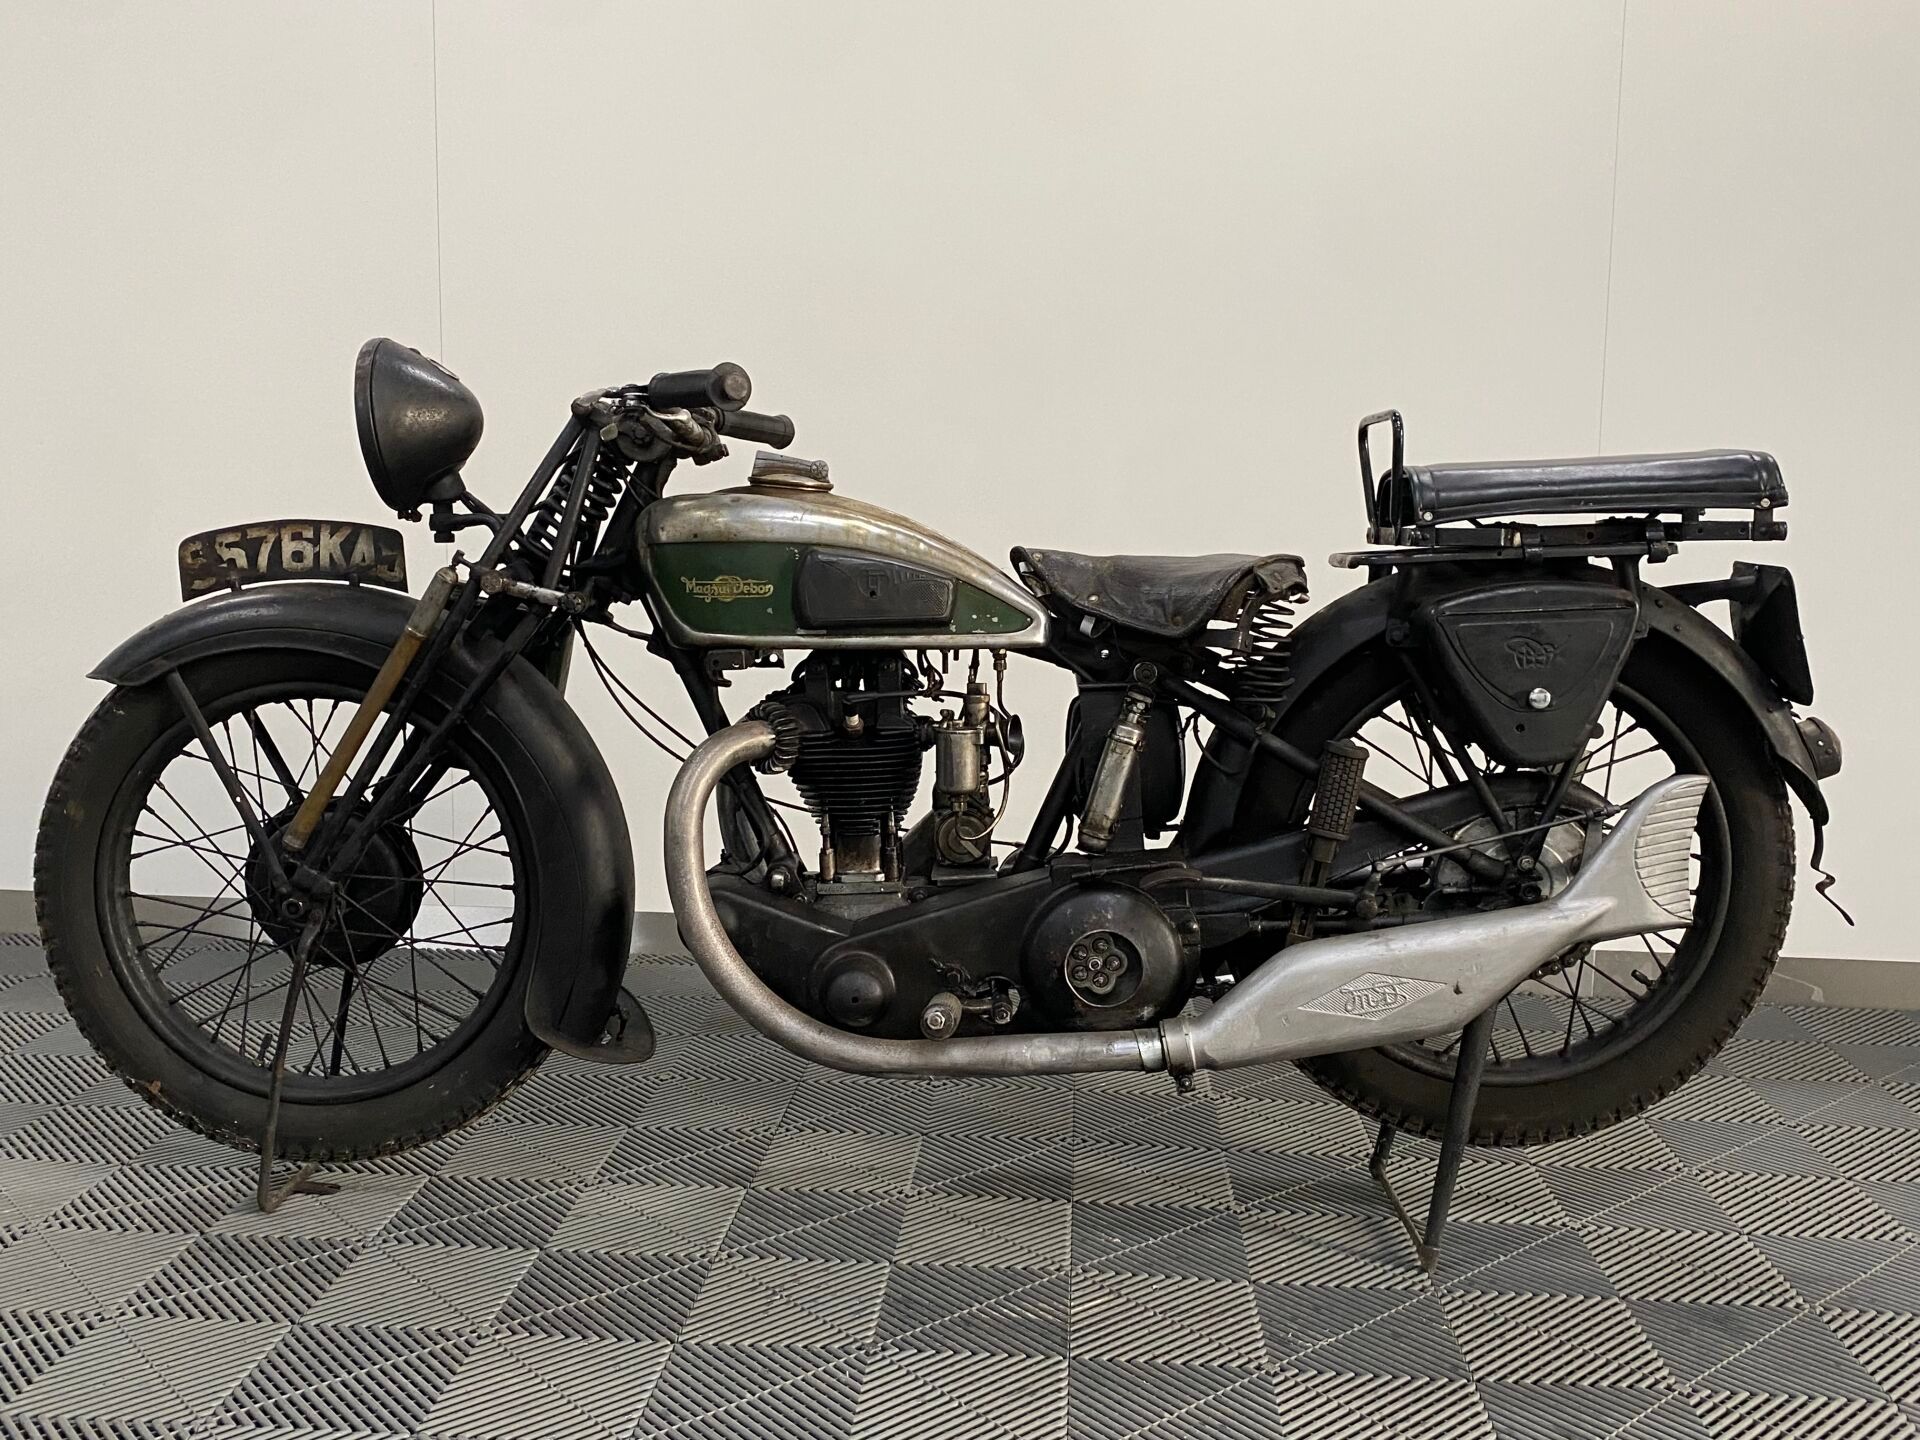 Null MAGNAT DEBON 350 BSSG
1934

Type: CSSF according to the registration but ac&hellip;